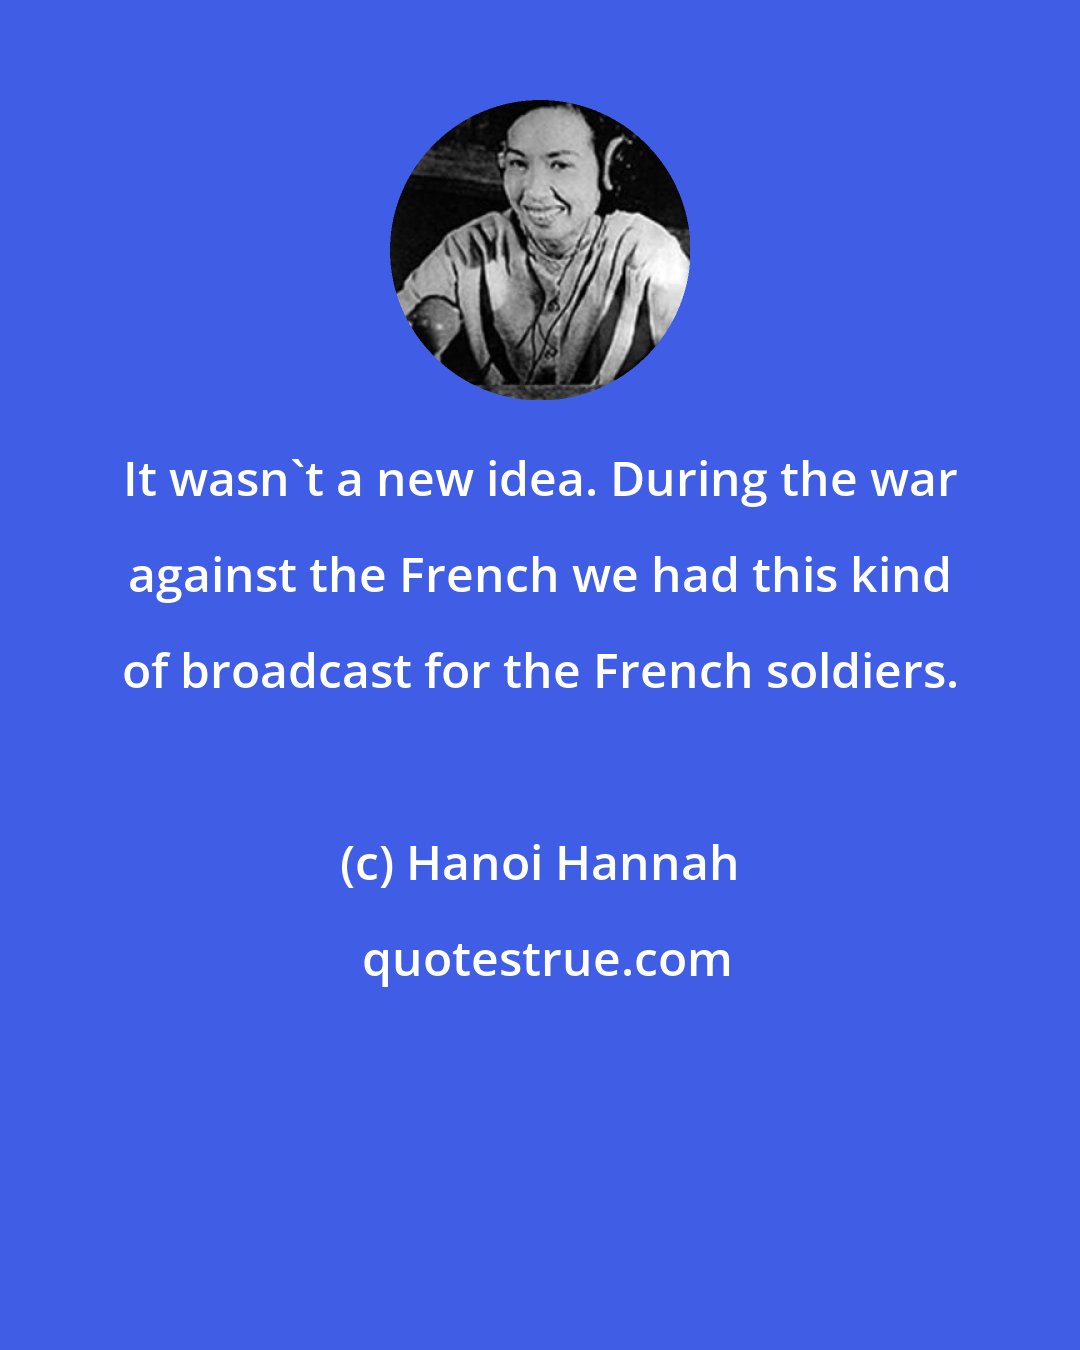 Hanoi Hannah: It wasn't a new idea. During the war against the French we had this kind of broadcast for the French soldiers.